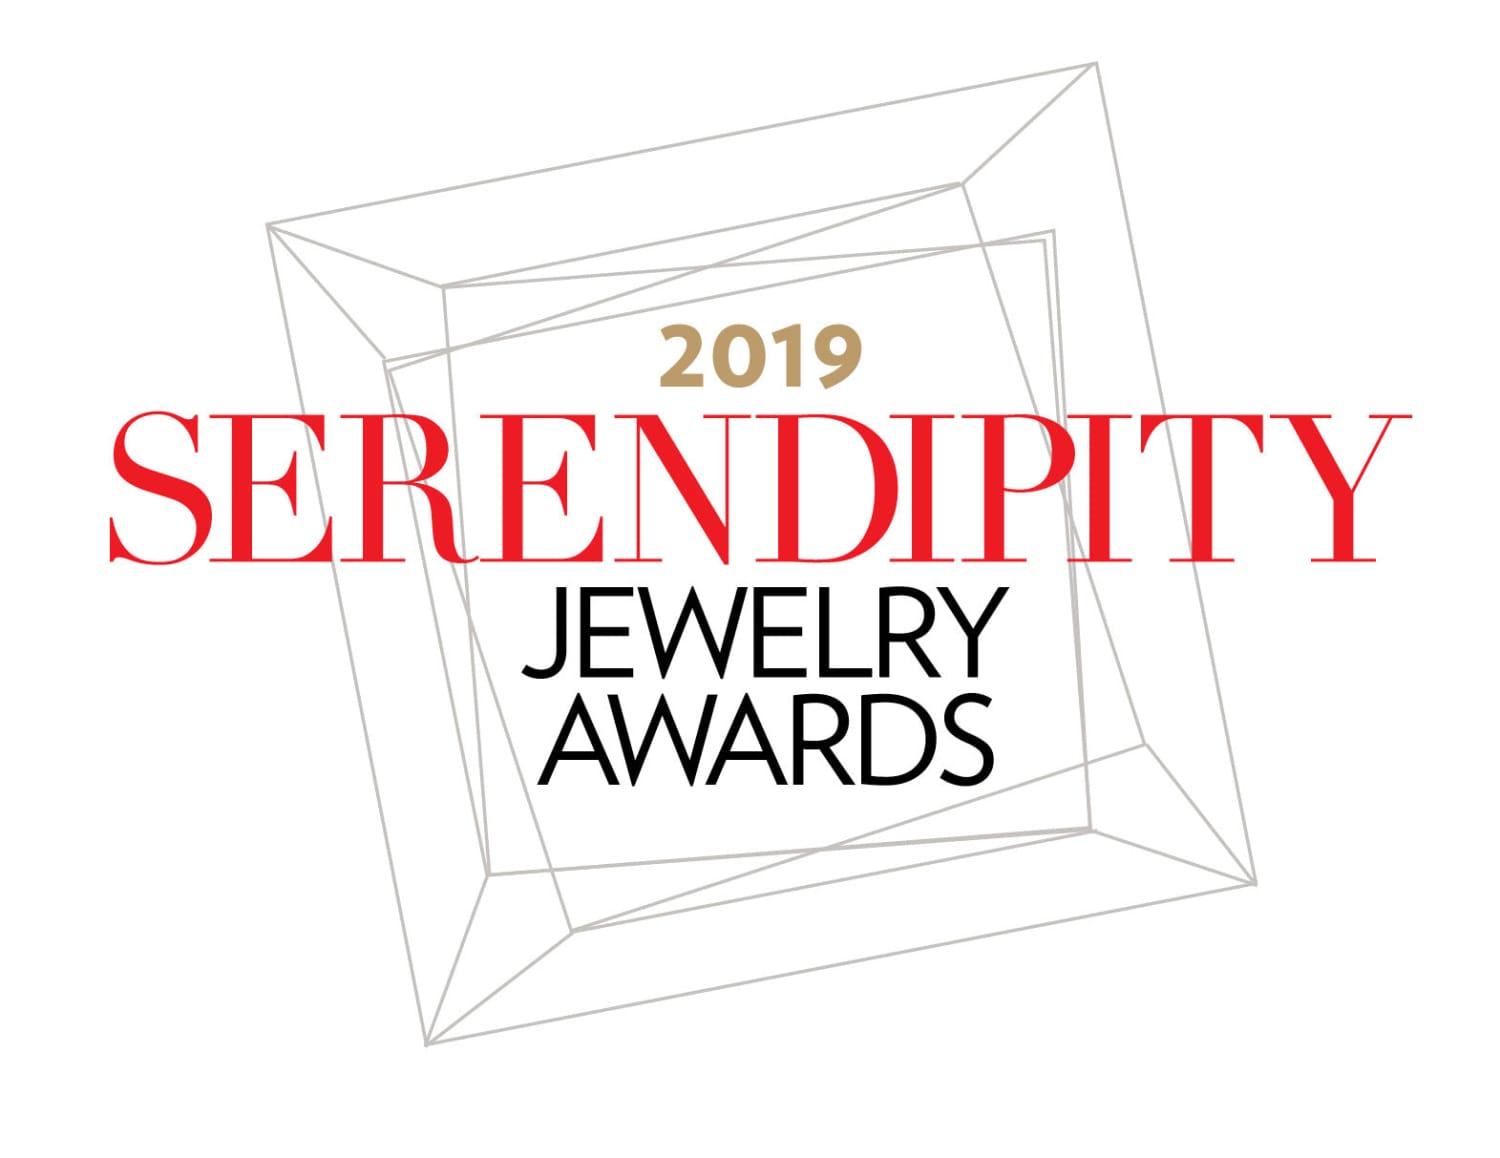 Meet the Winners of the 2019 Serendipity Jewelry Awards